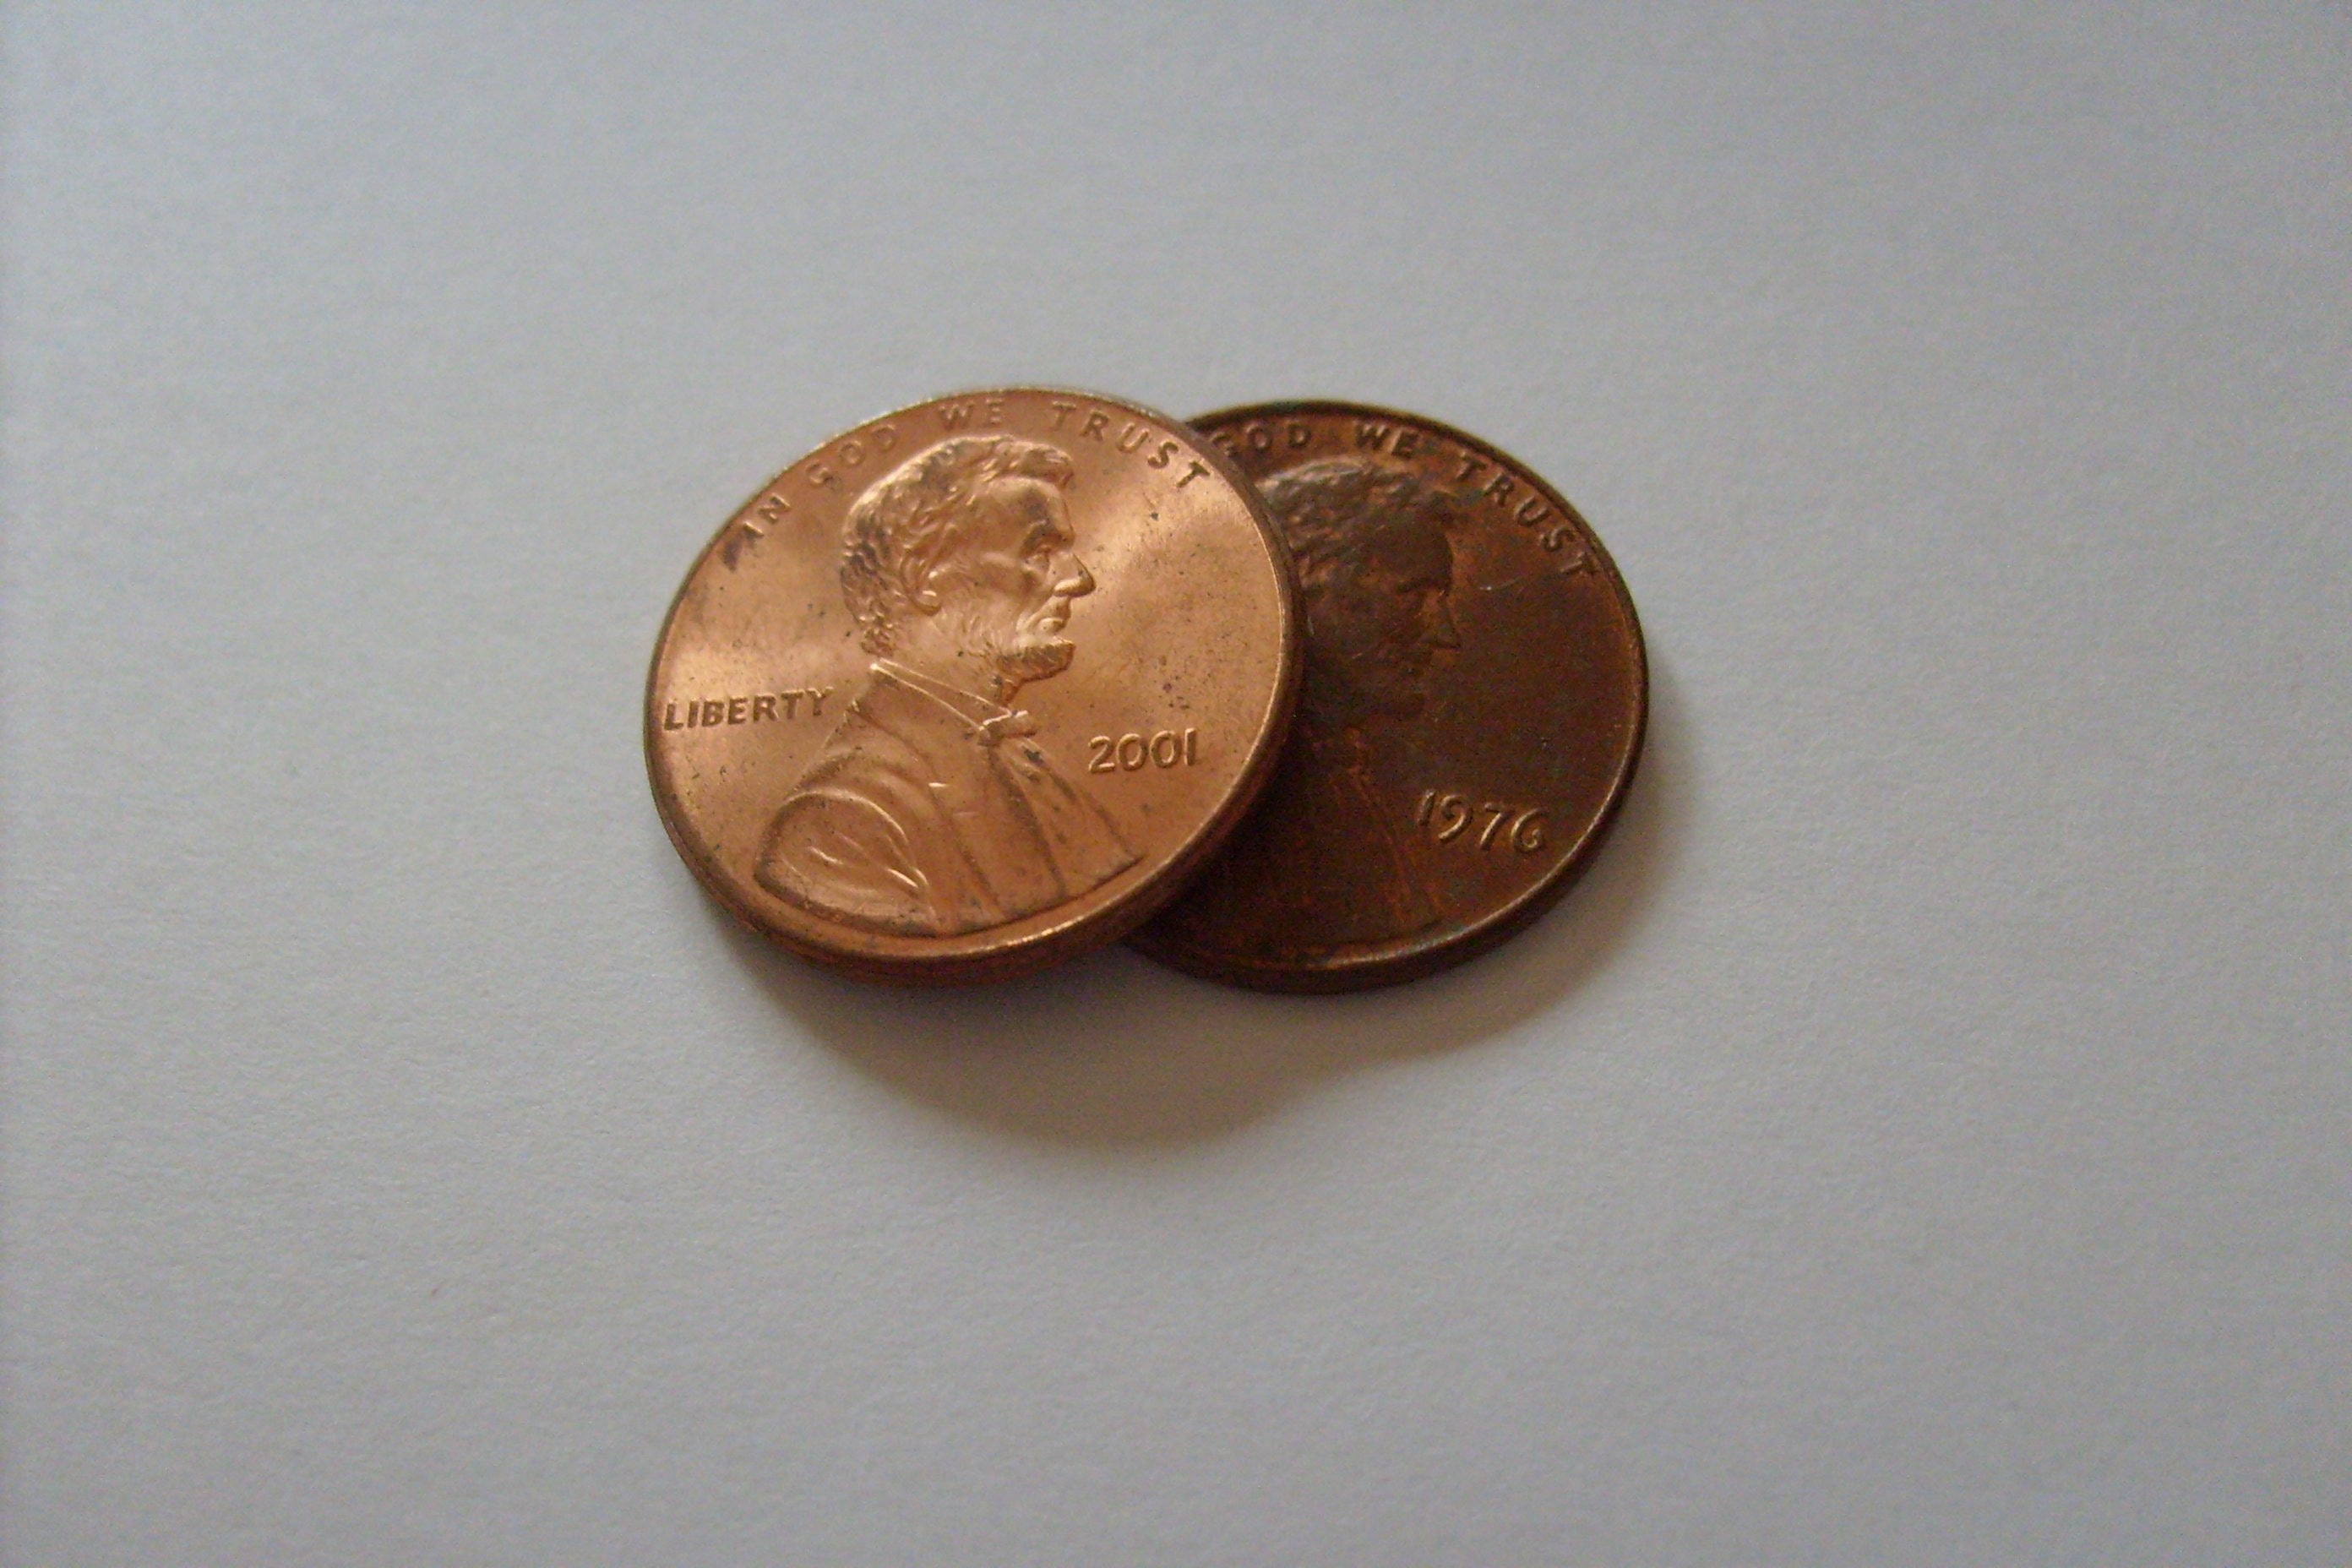 two gold man's profile round coins